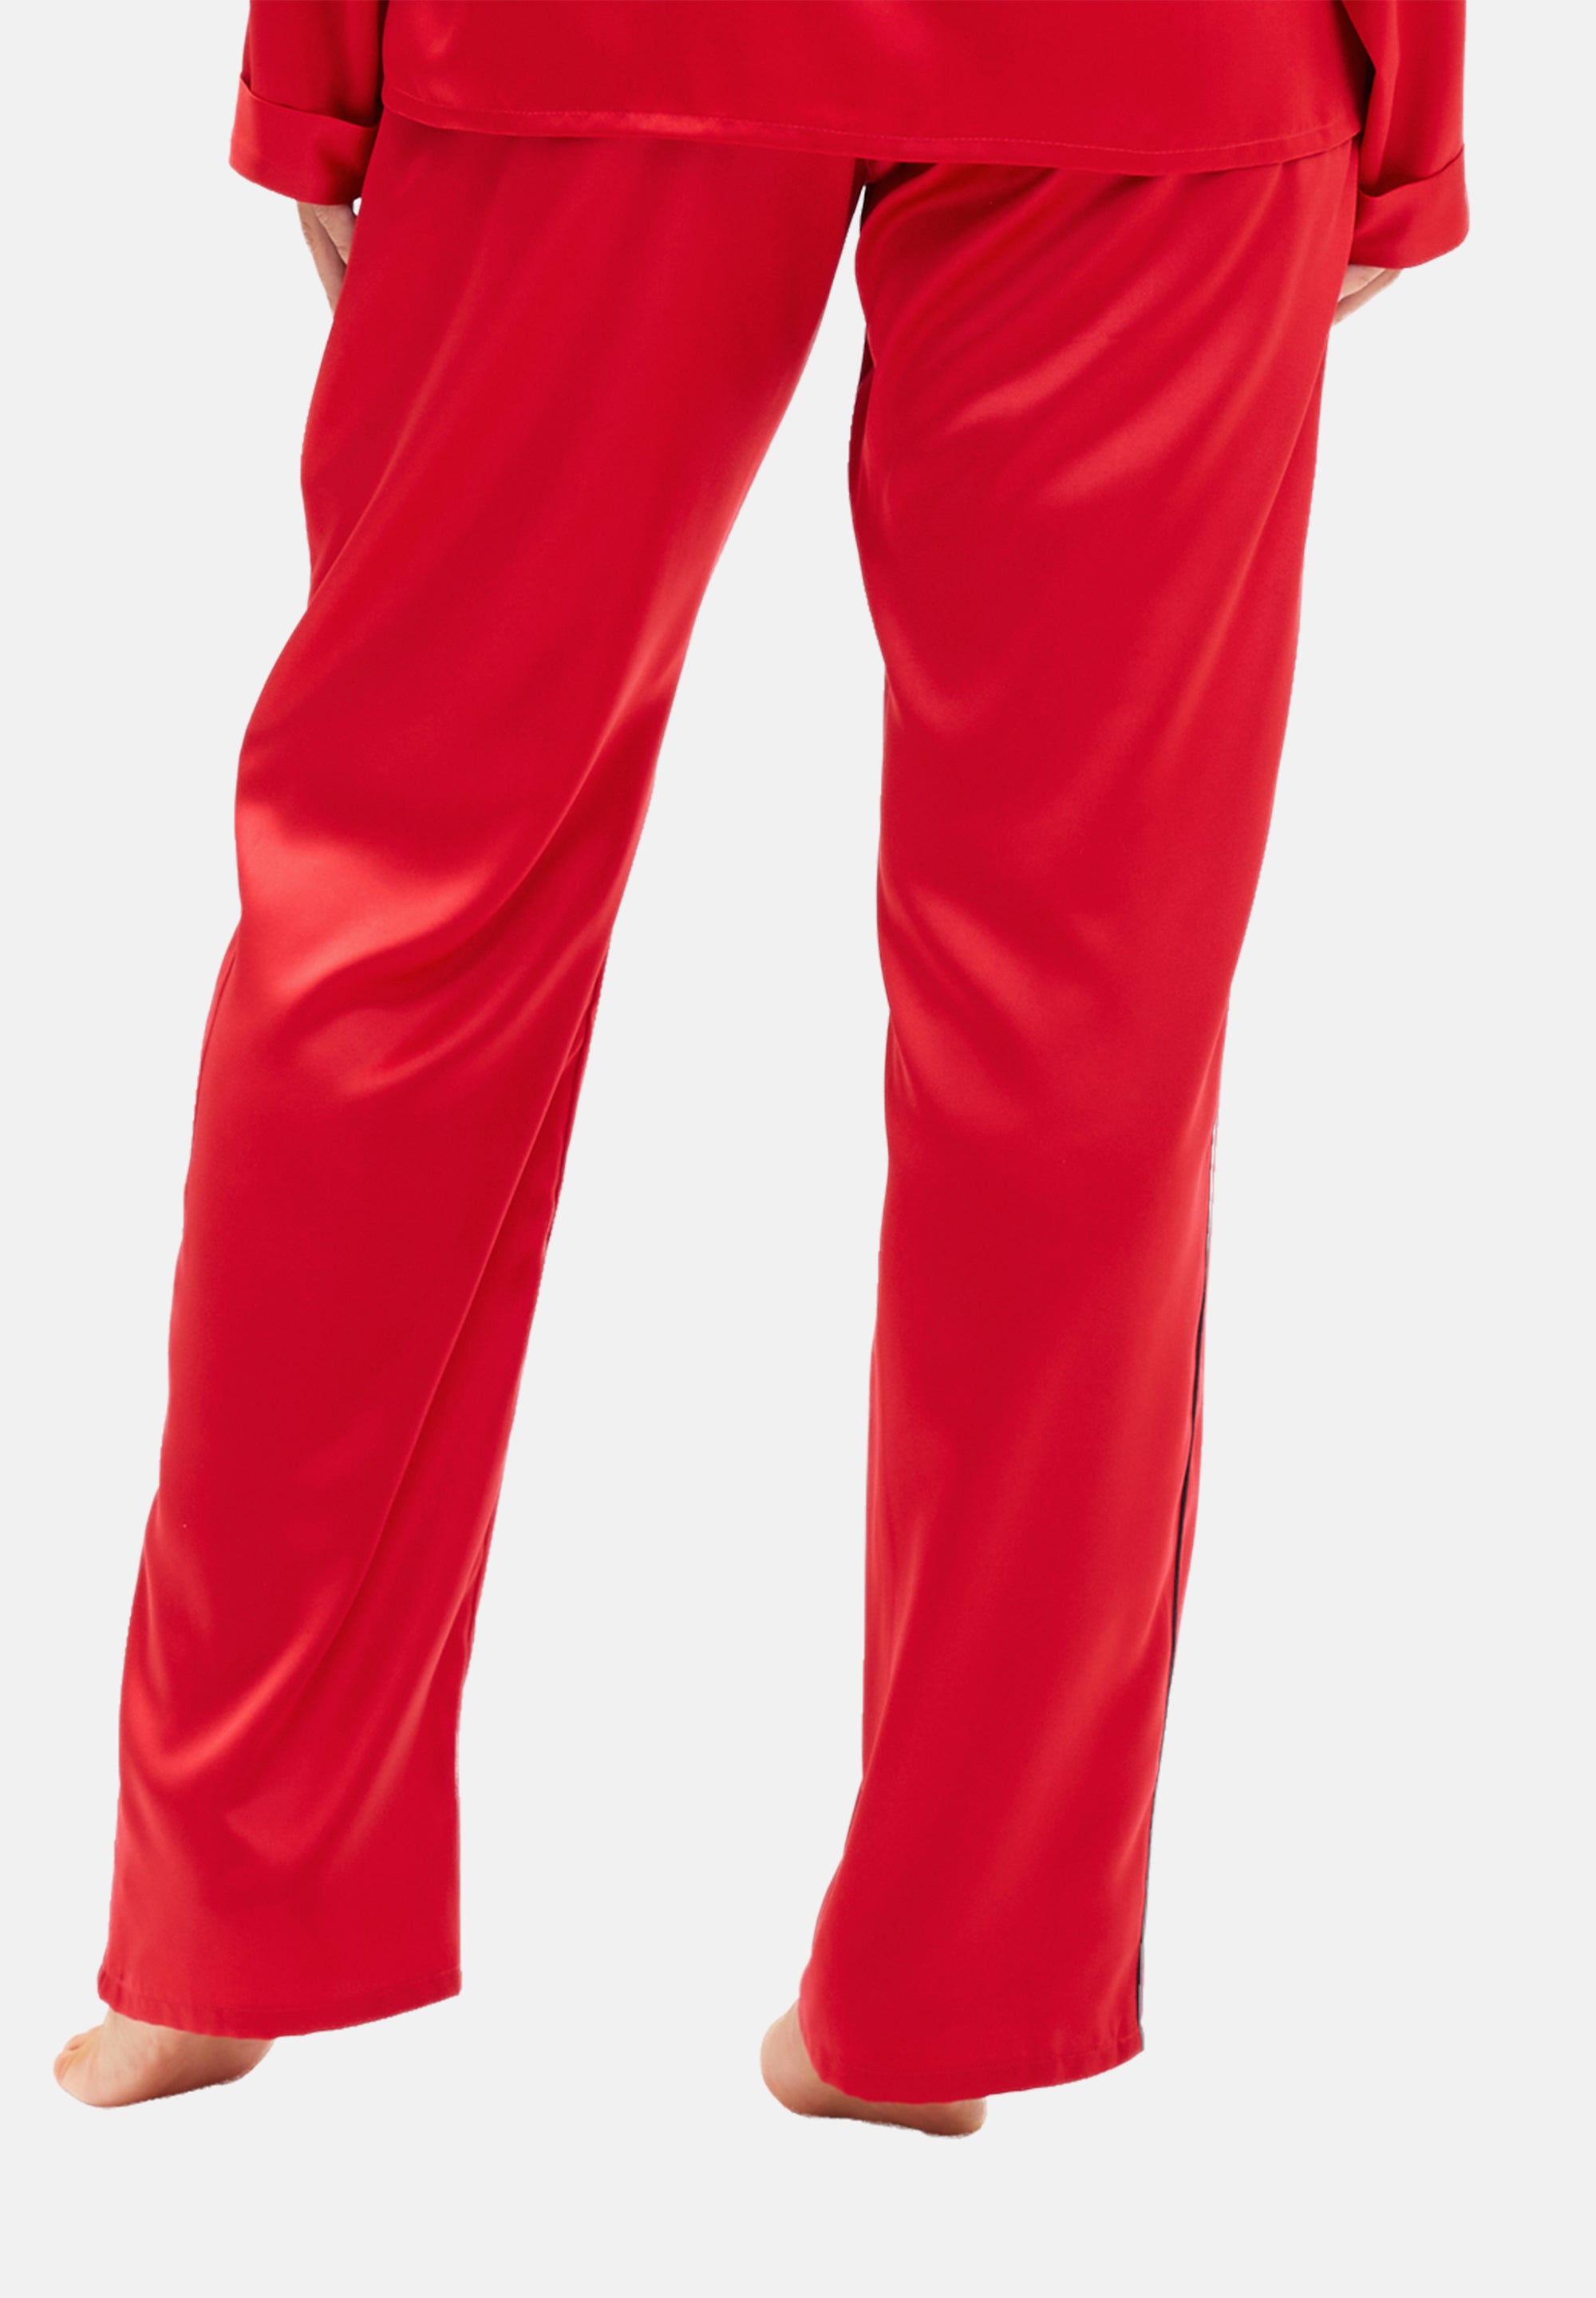 Trousers Gorgeous Red Equestrian